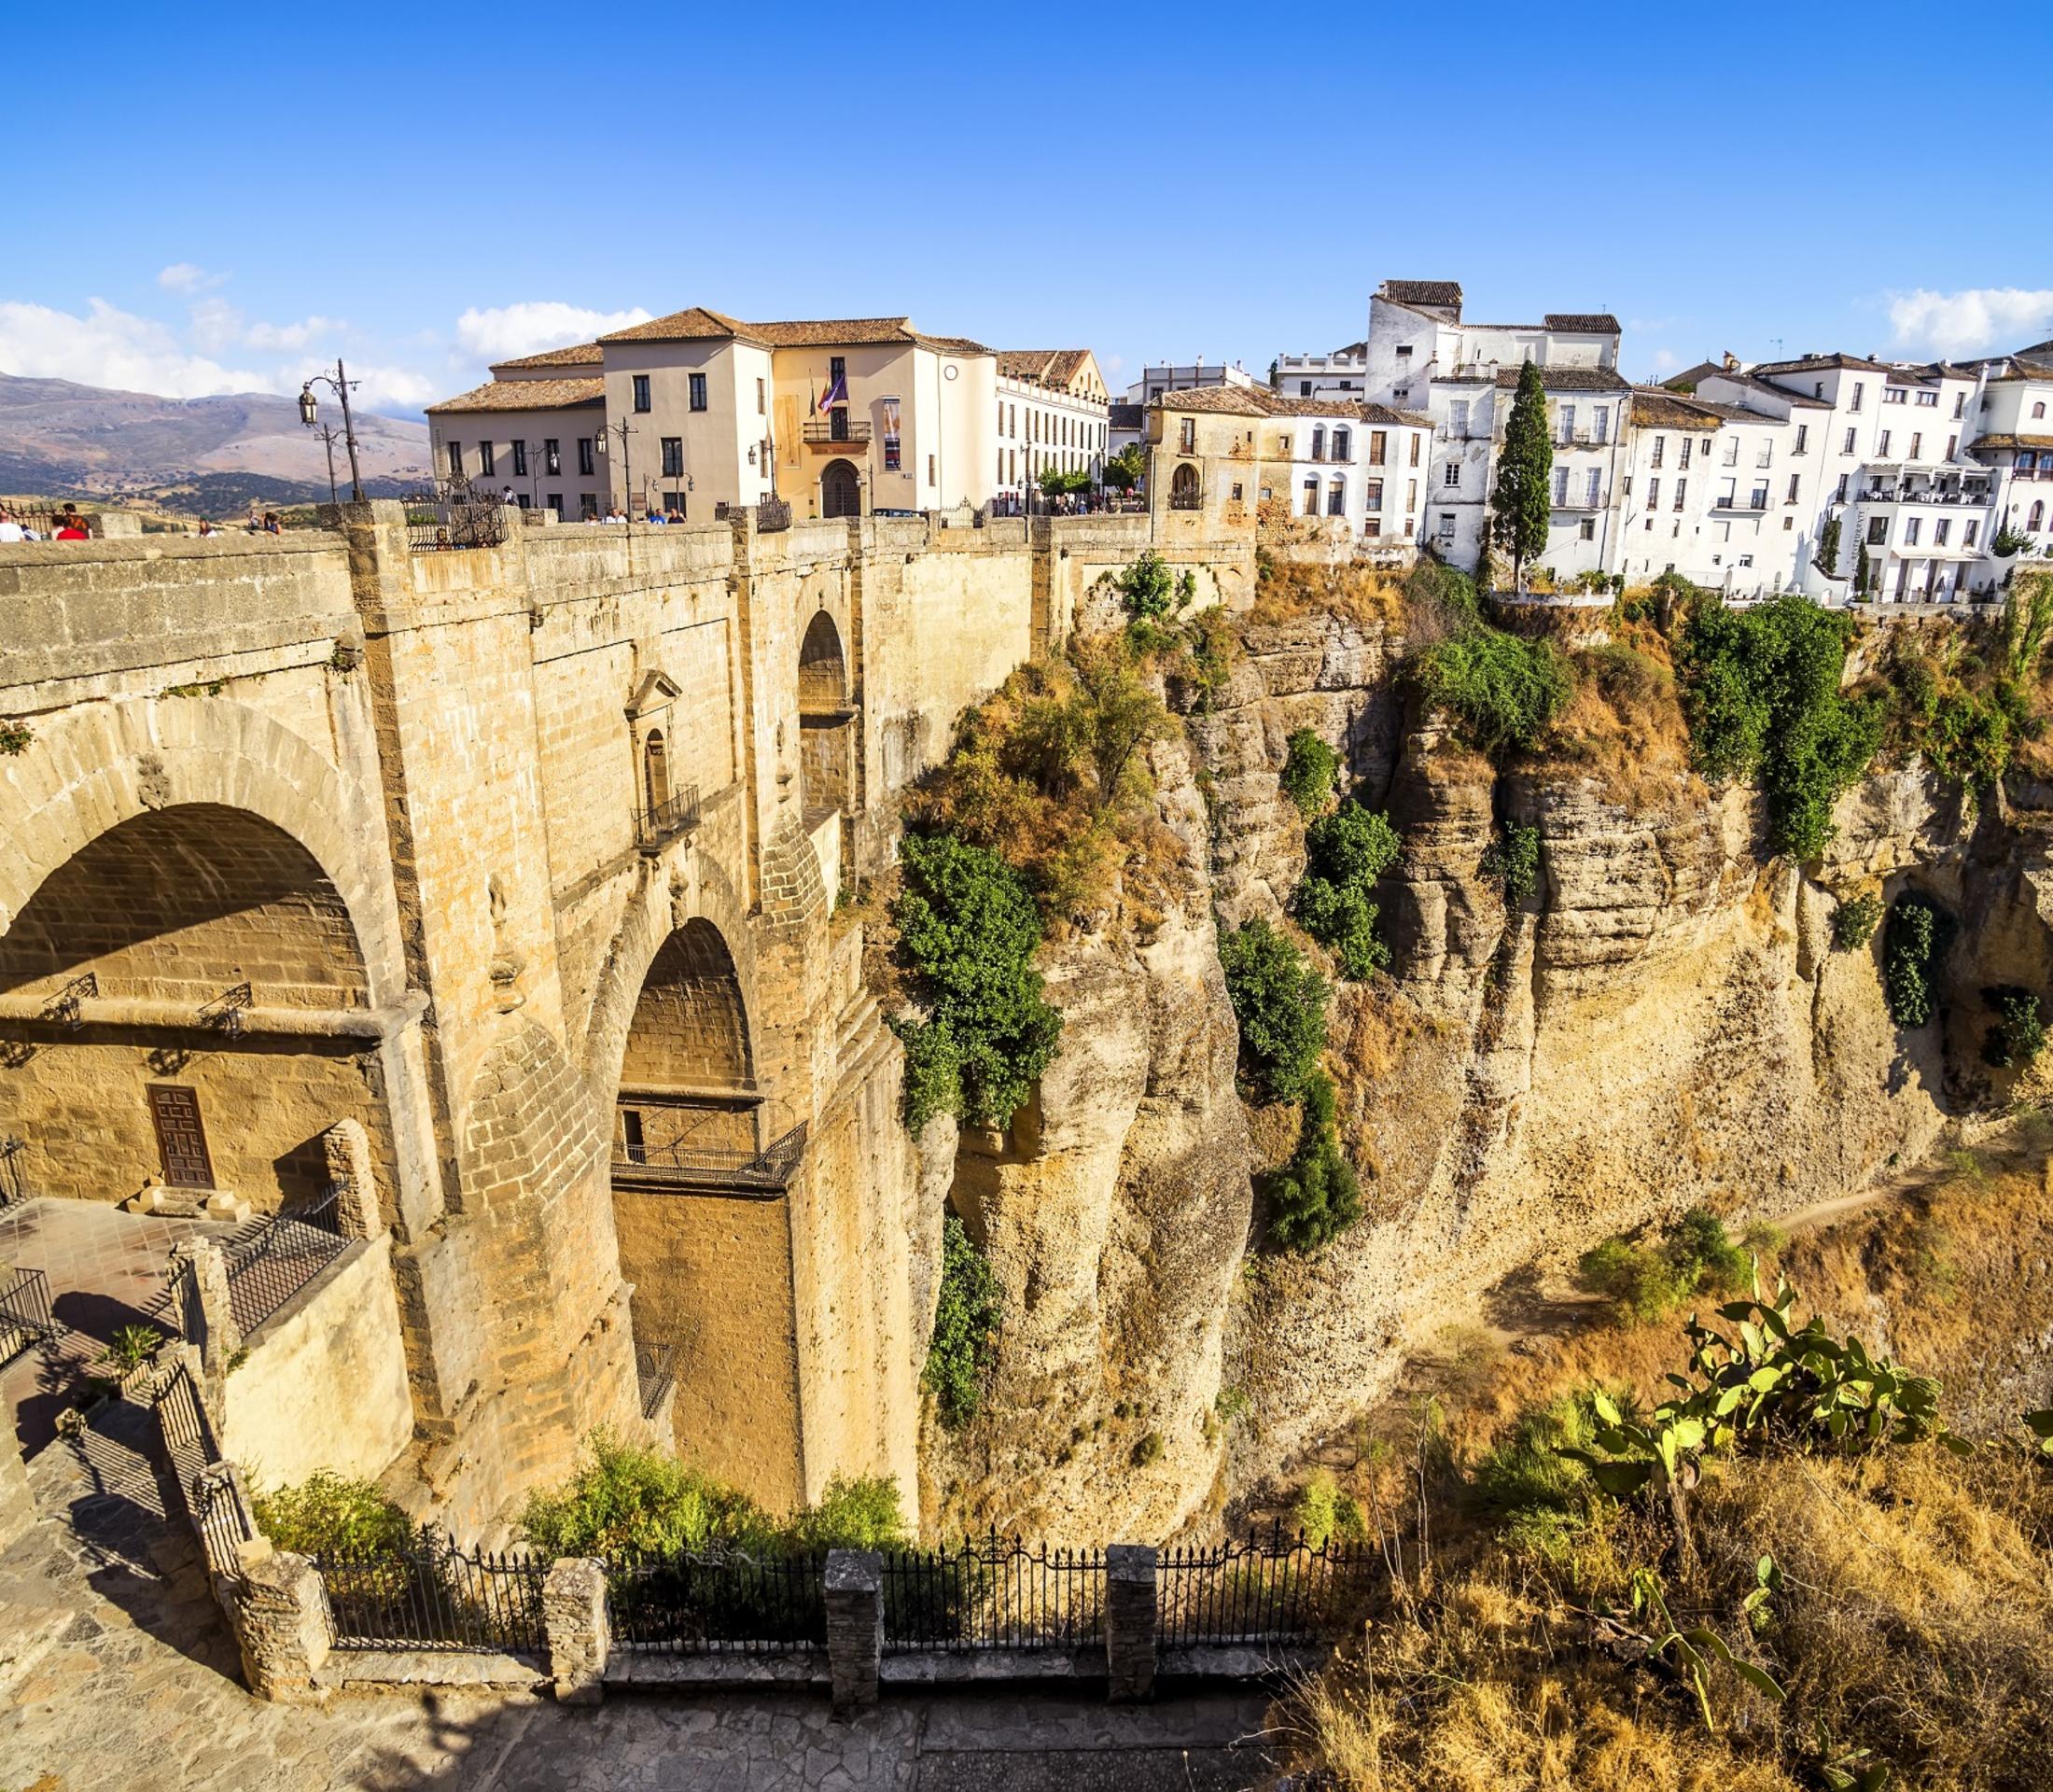 Guided Excursion to Ronda and Visit to the Wine Museum – Leaving from Malaga